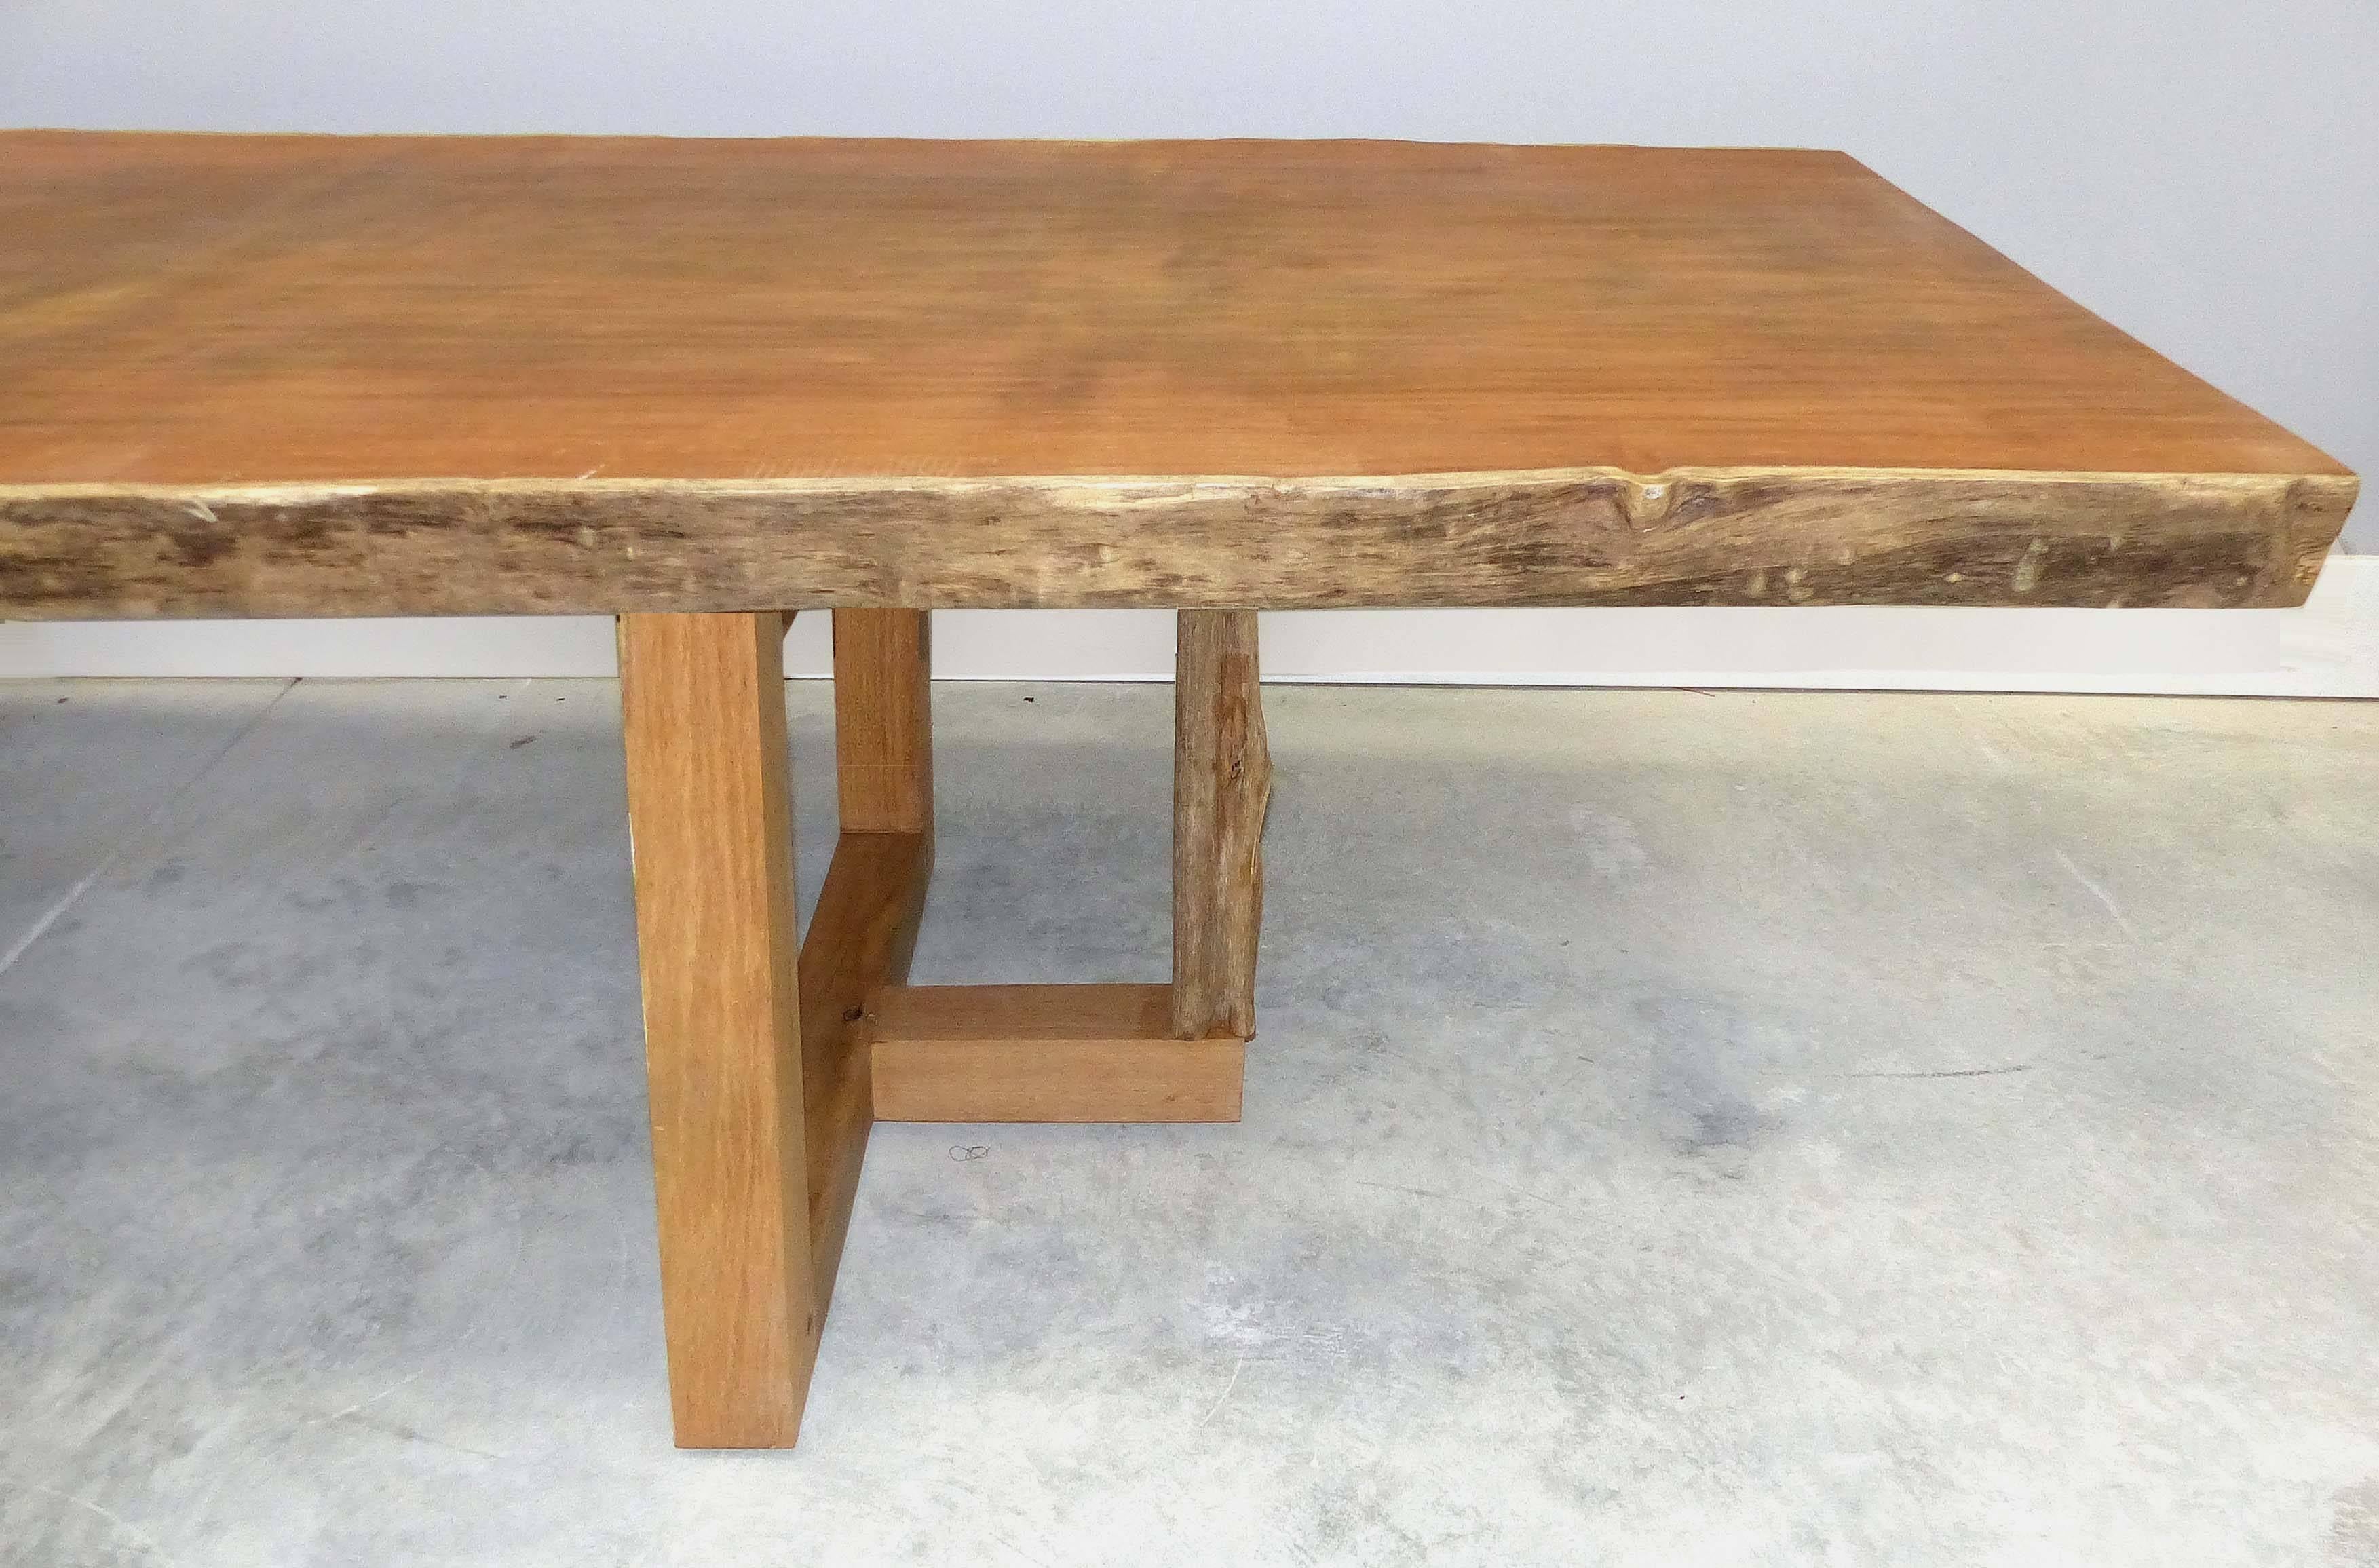 Contemporary Monumental Amazon Reclaimed Andira Anthelmia Wood Table by Valéria Totti